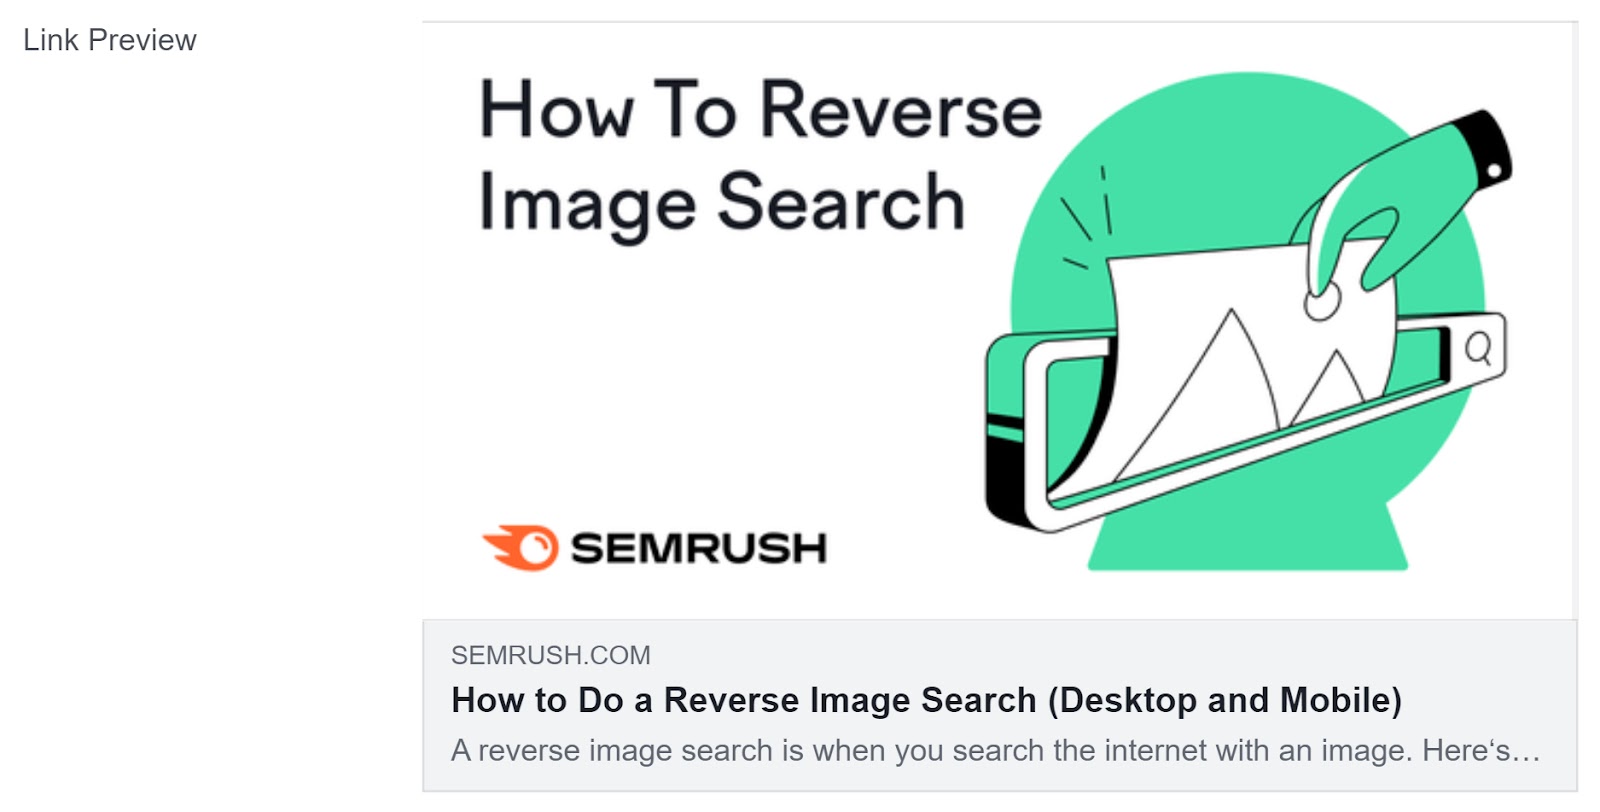 "Link Preview" section showing how Semrush's blog on reverse image search would appear on Facebook